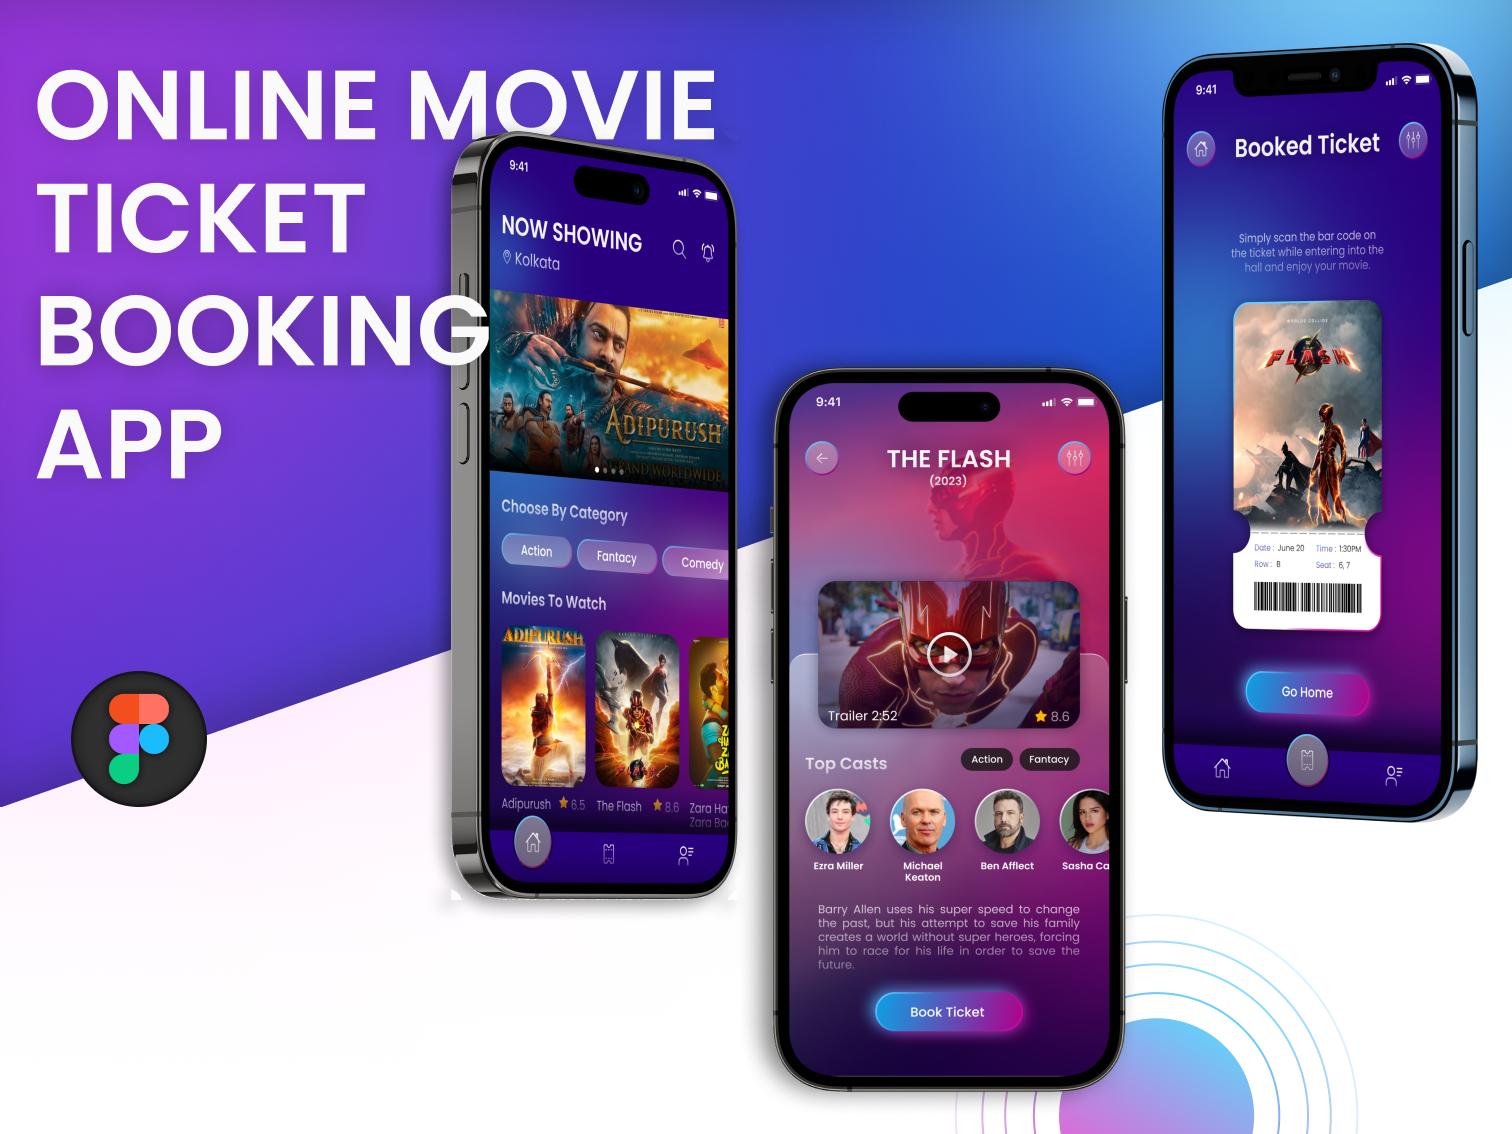 movie-ticket-booking-system-here-we-are-going-to-look-into-the-by